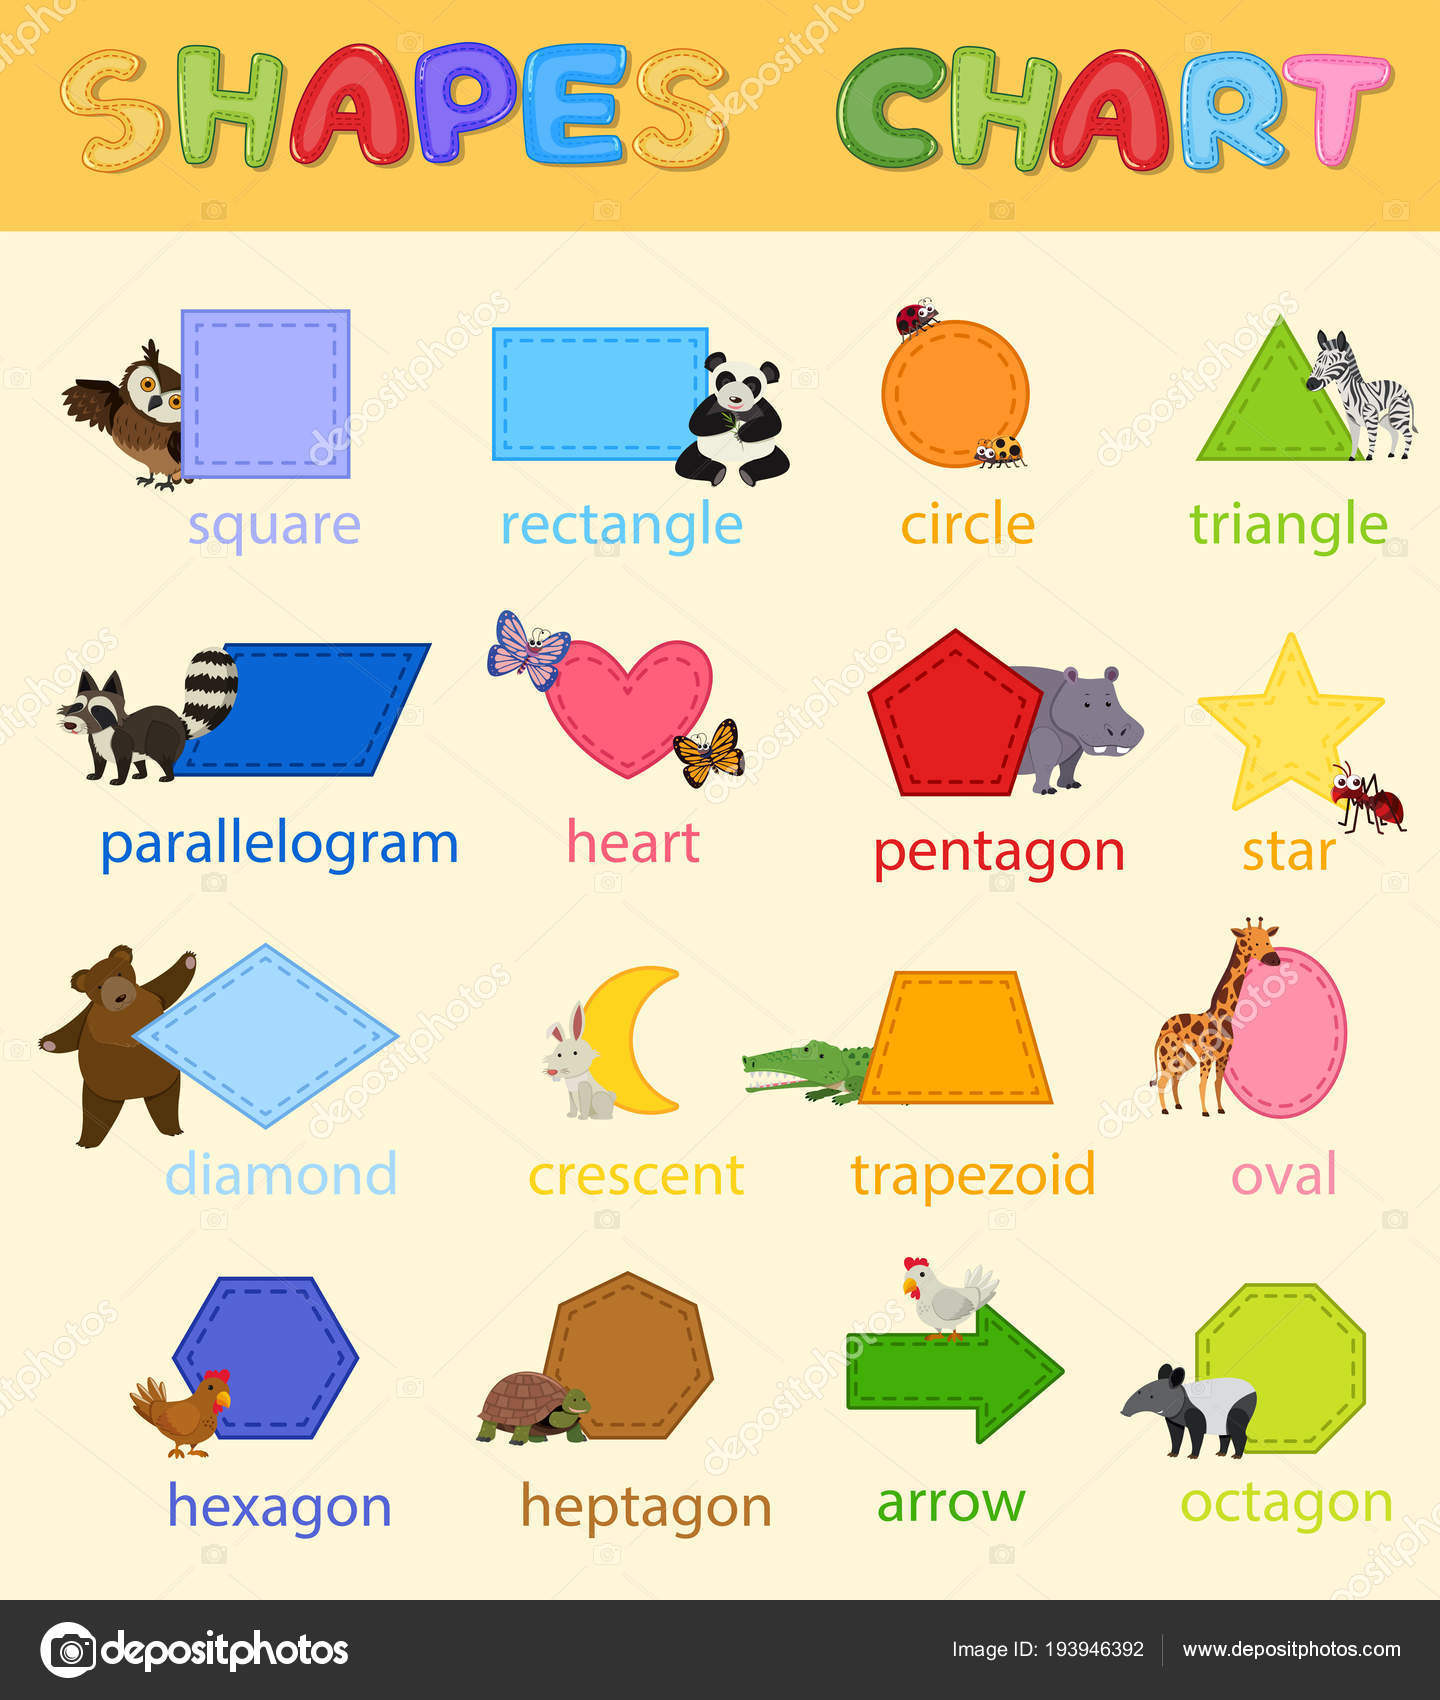 Shape Chart For Toddlers